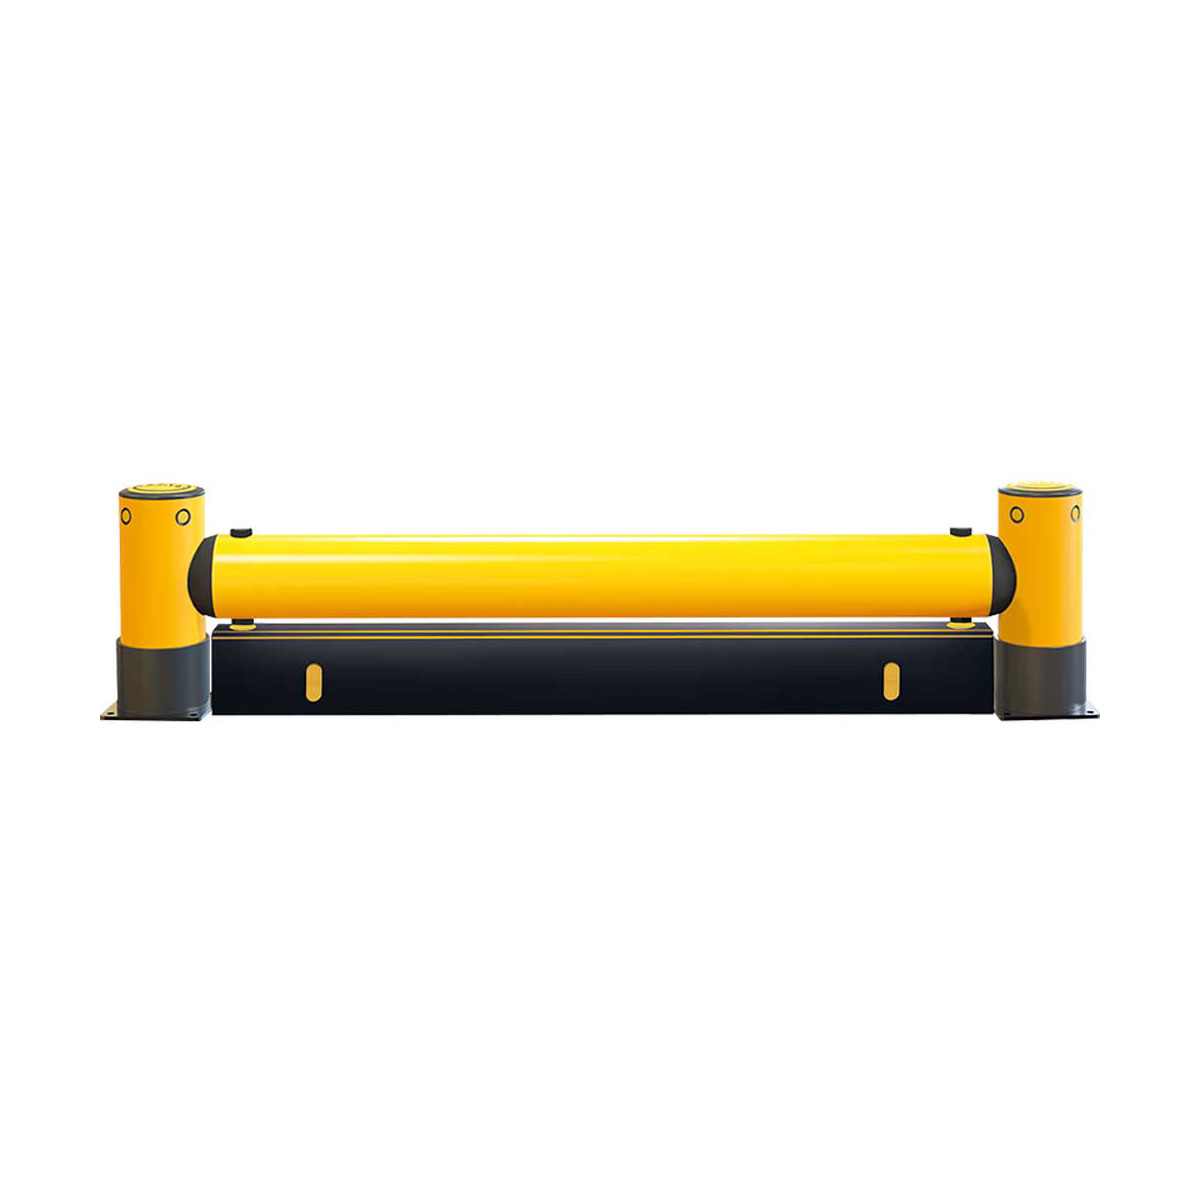 Buy Rack-end Barrier - A-Safe (Flexible Plastic) in Traffic Barriers from A-Safe available at Astrolift NZ